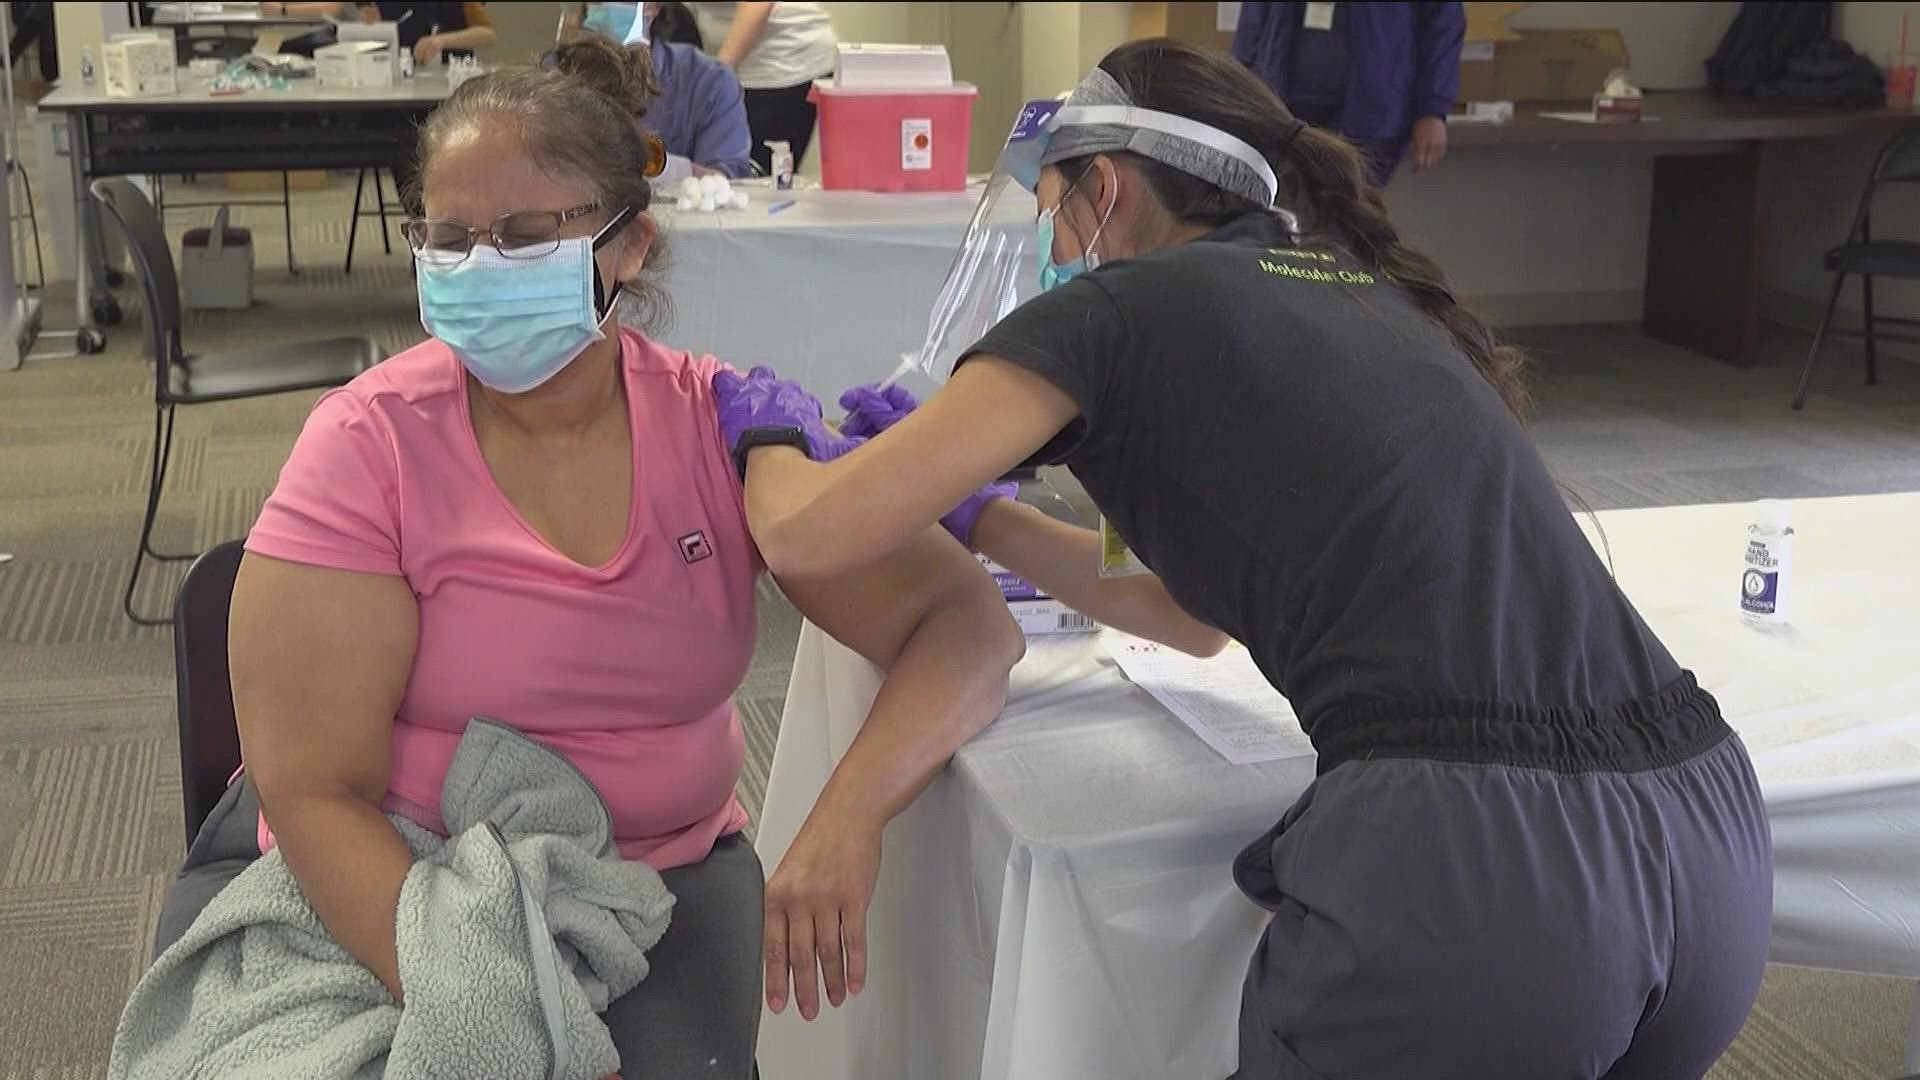 Doctors say vaccine fatigue may lead to higher flu numbers.